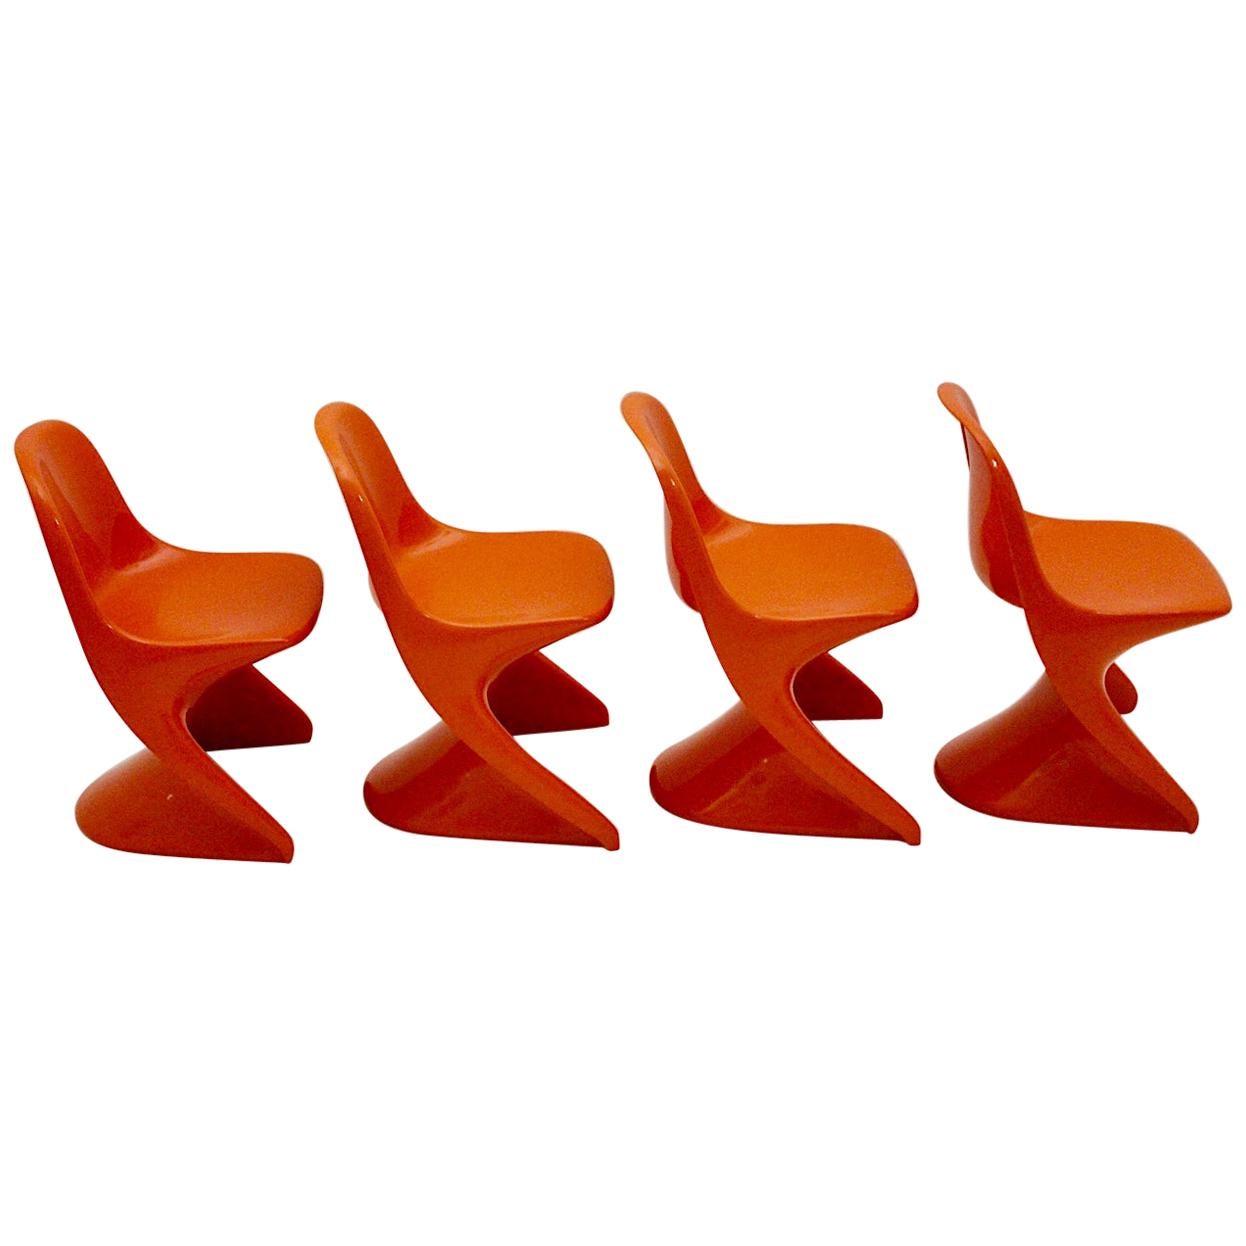 Space Age Plastic Four Vintage Orange Children Stacking Chairs 1970s Casalino For Sale